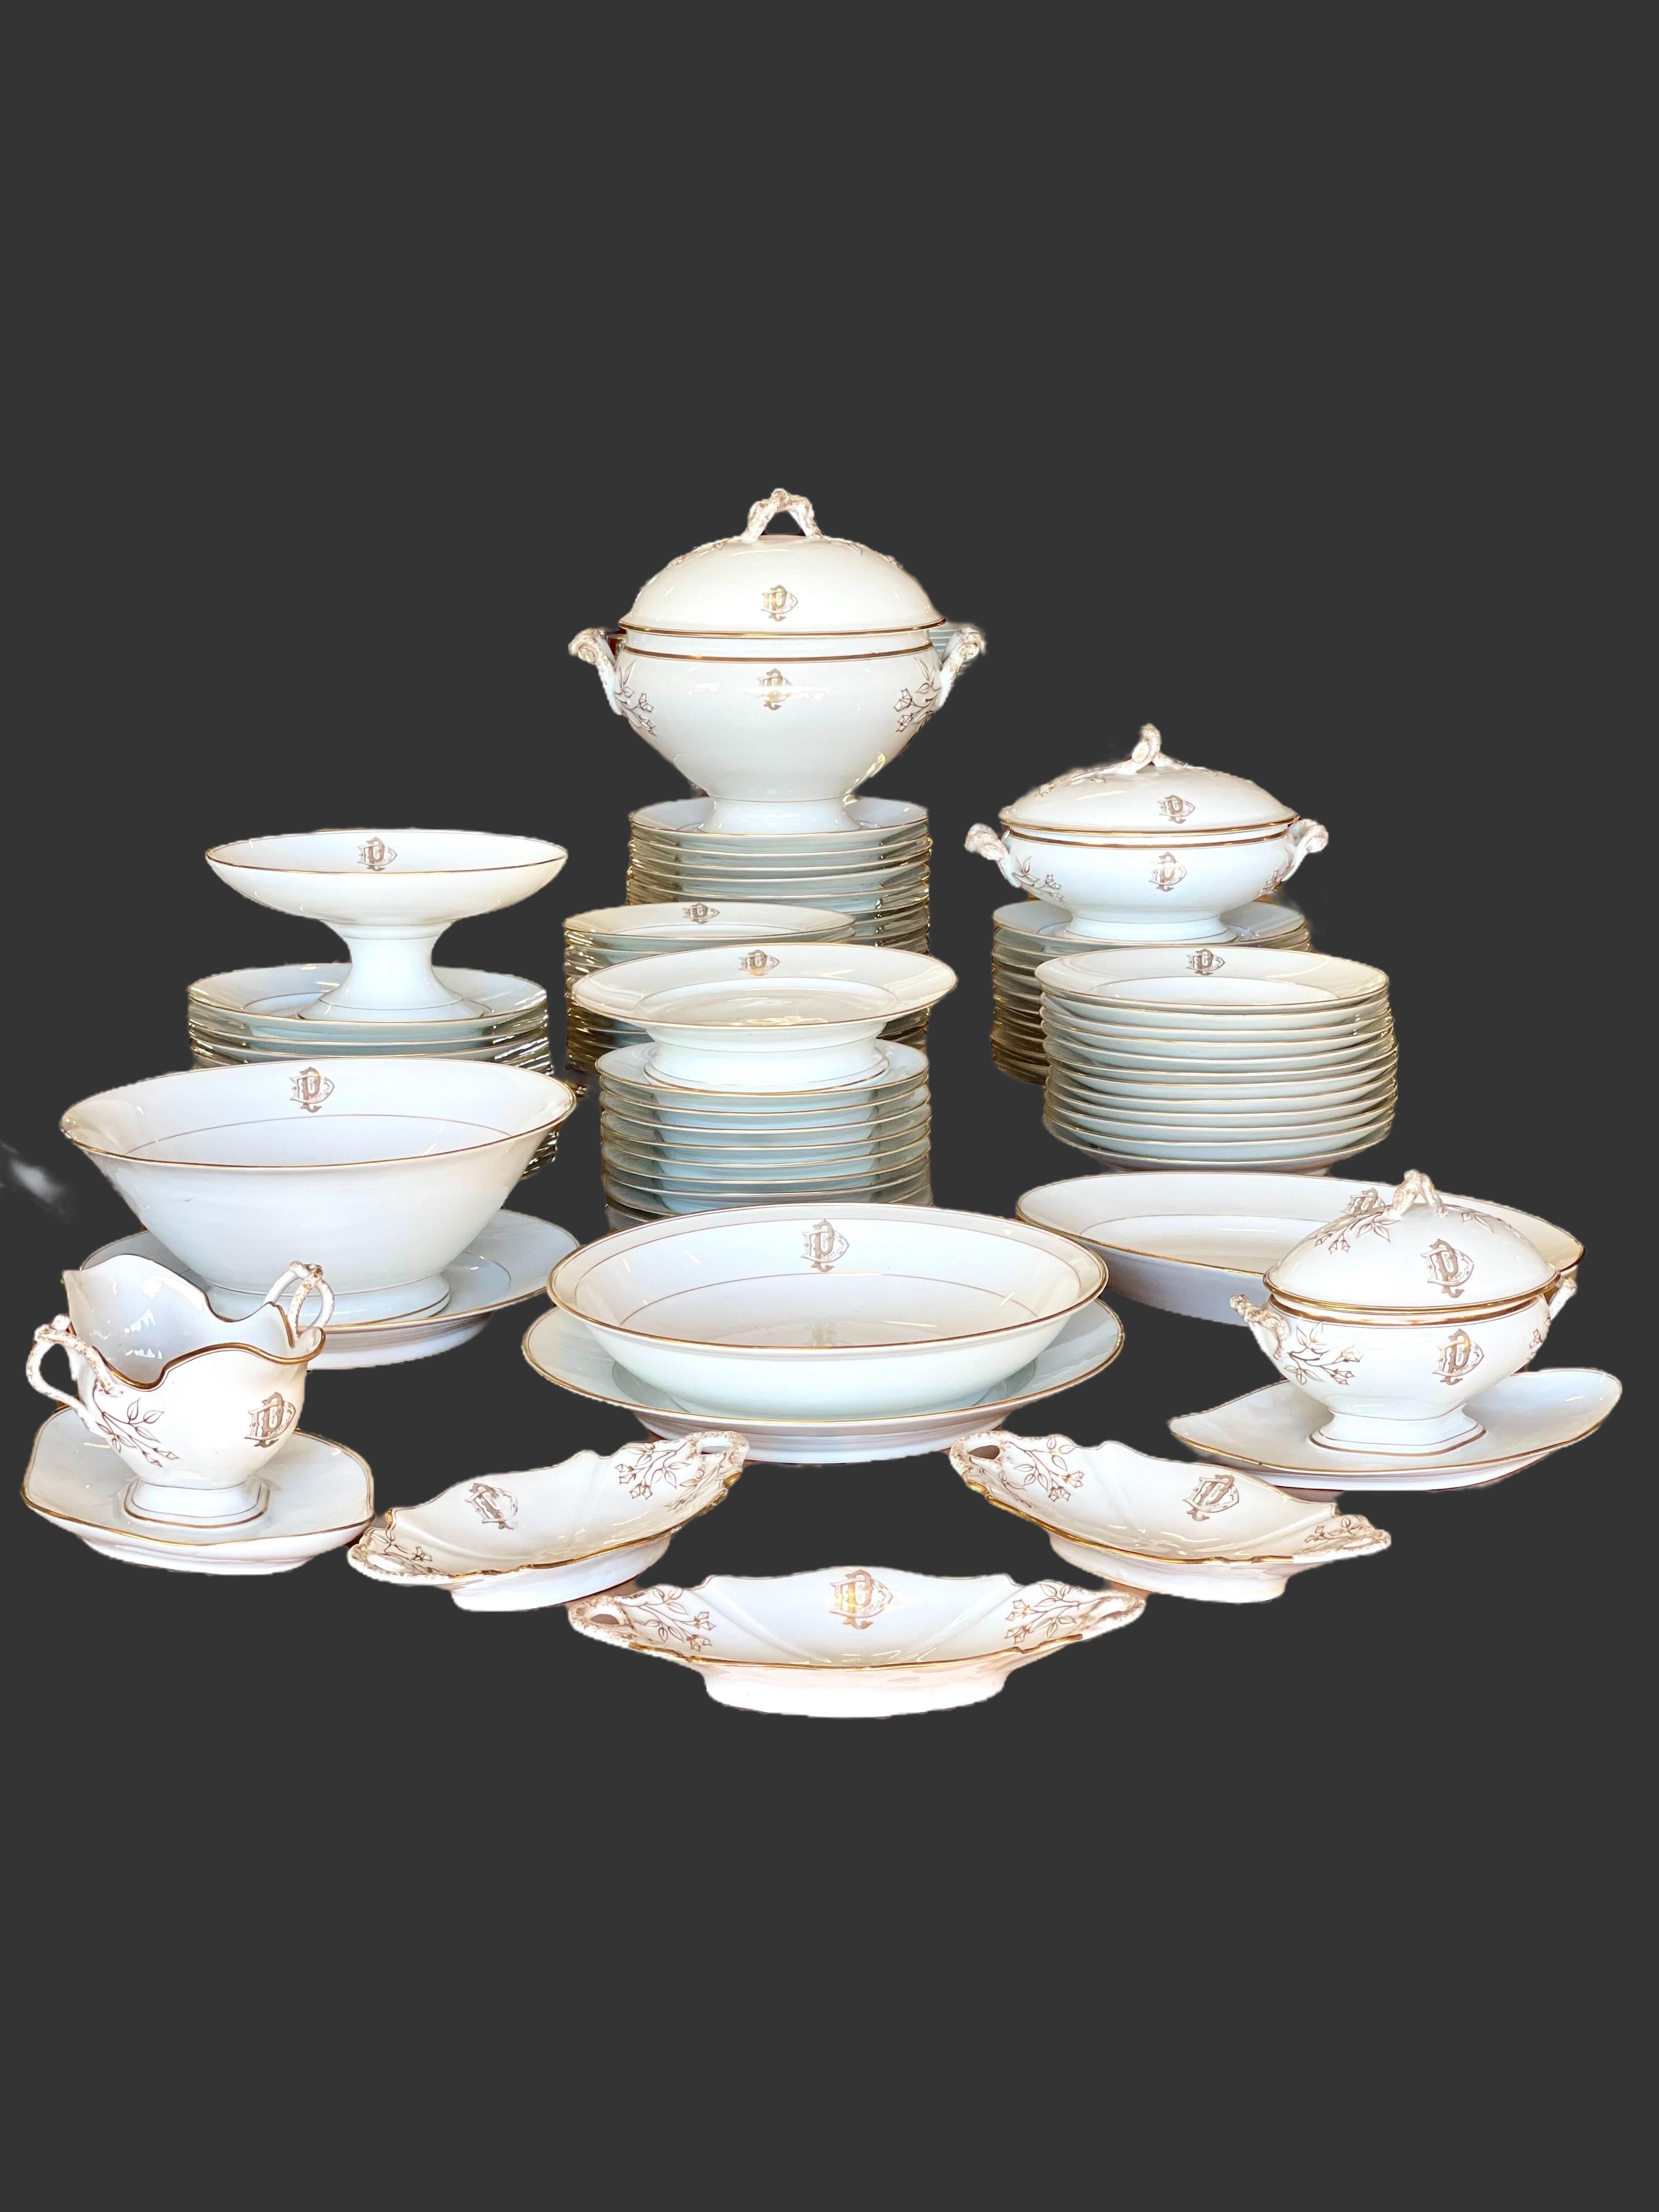 Limoges Porcelain Set of 50 Piece Dinner Service with Gilt Edges and Monogramme For Sale 4